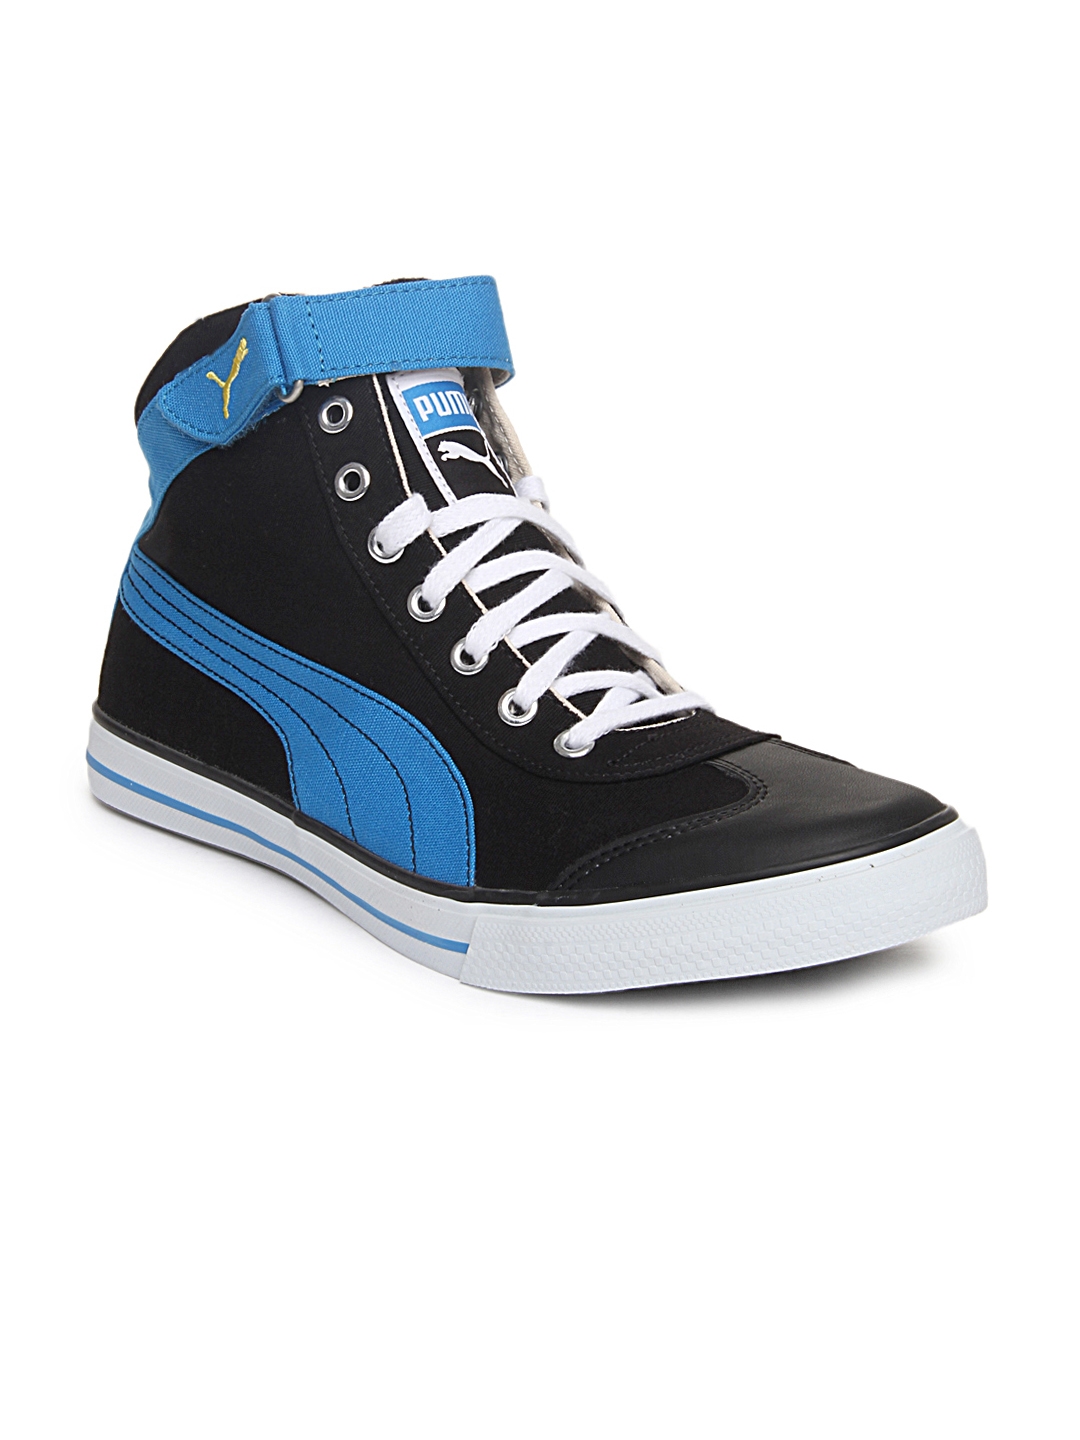 puma 917 mid 2.0 ind sneakers myntra